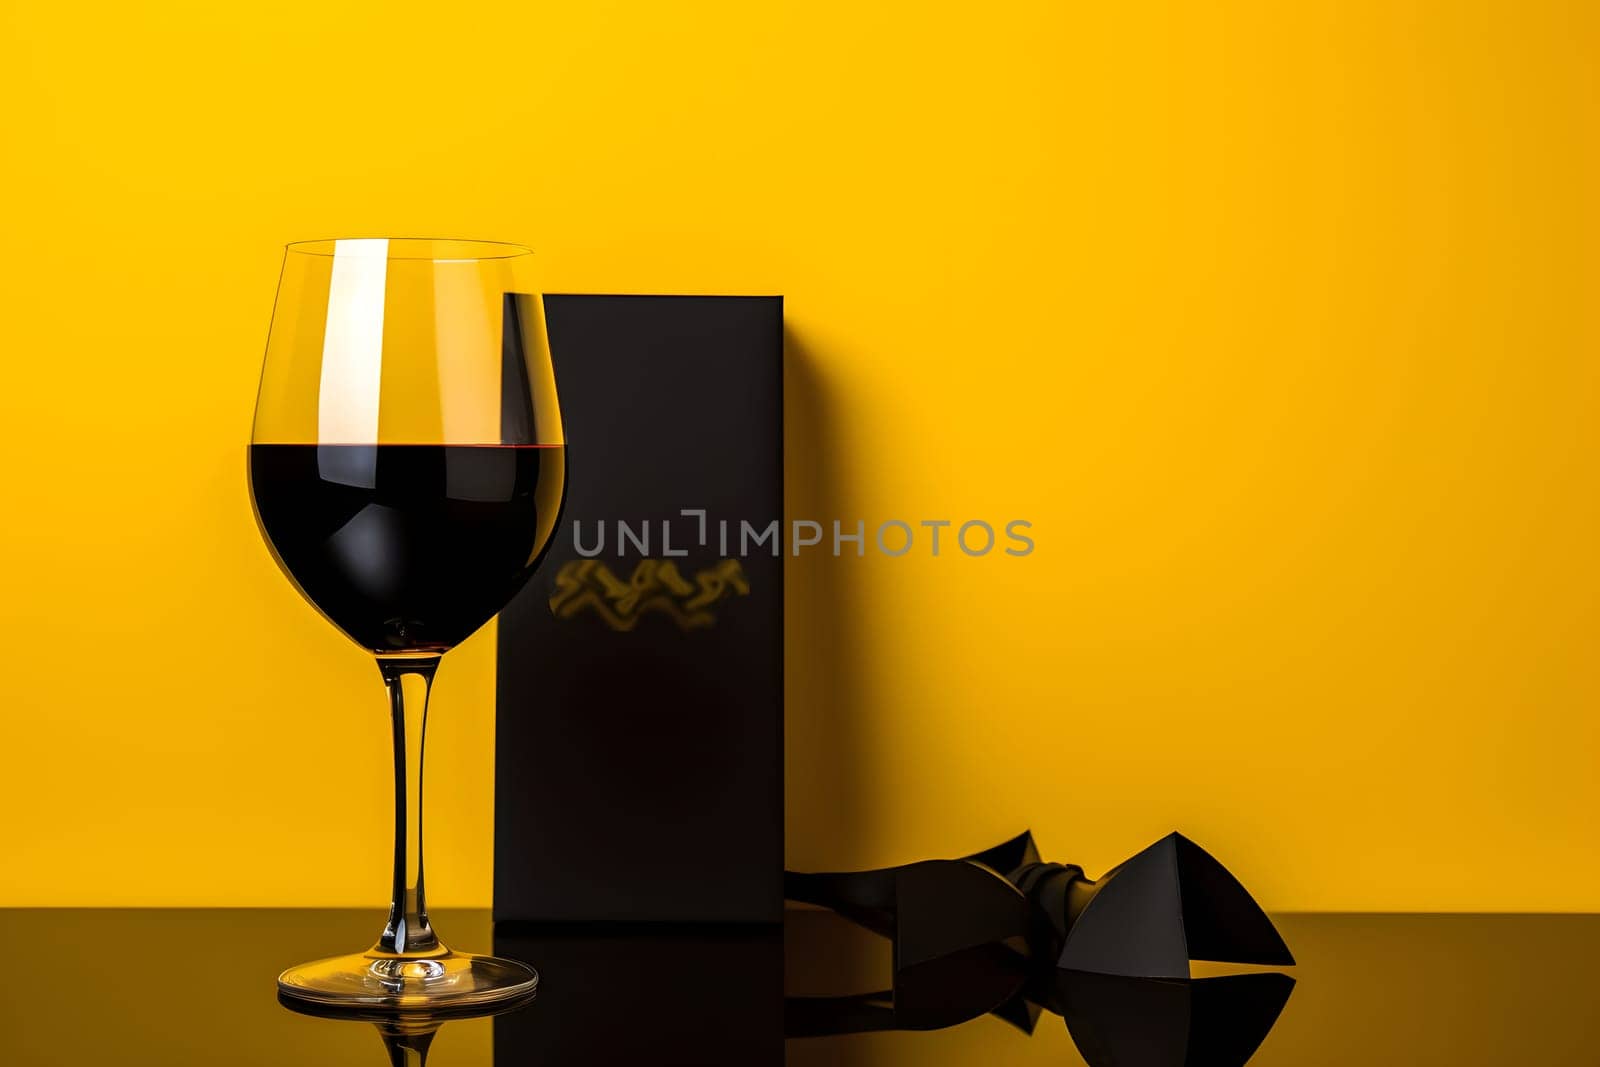 crystal glass with dark wine and a gift box. Black Friday Shopping by audiznam2609